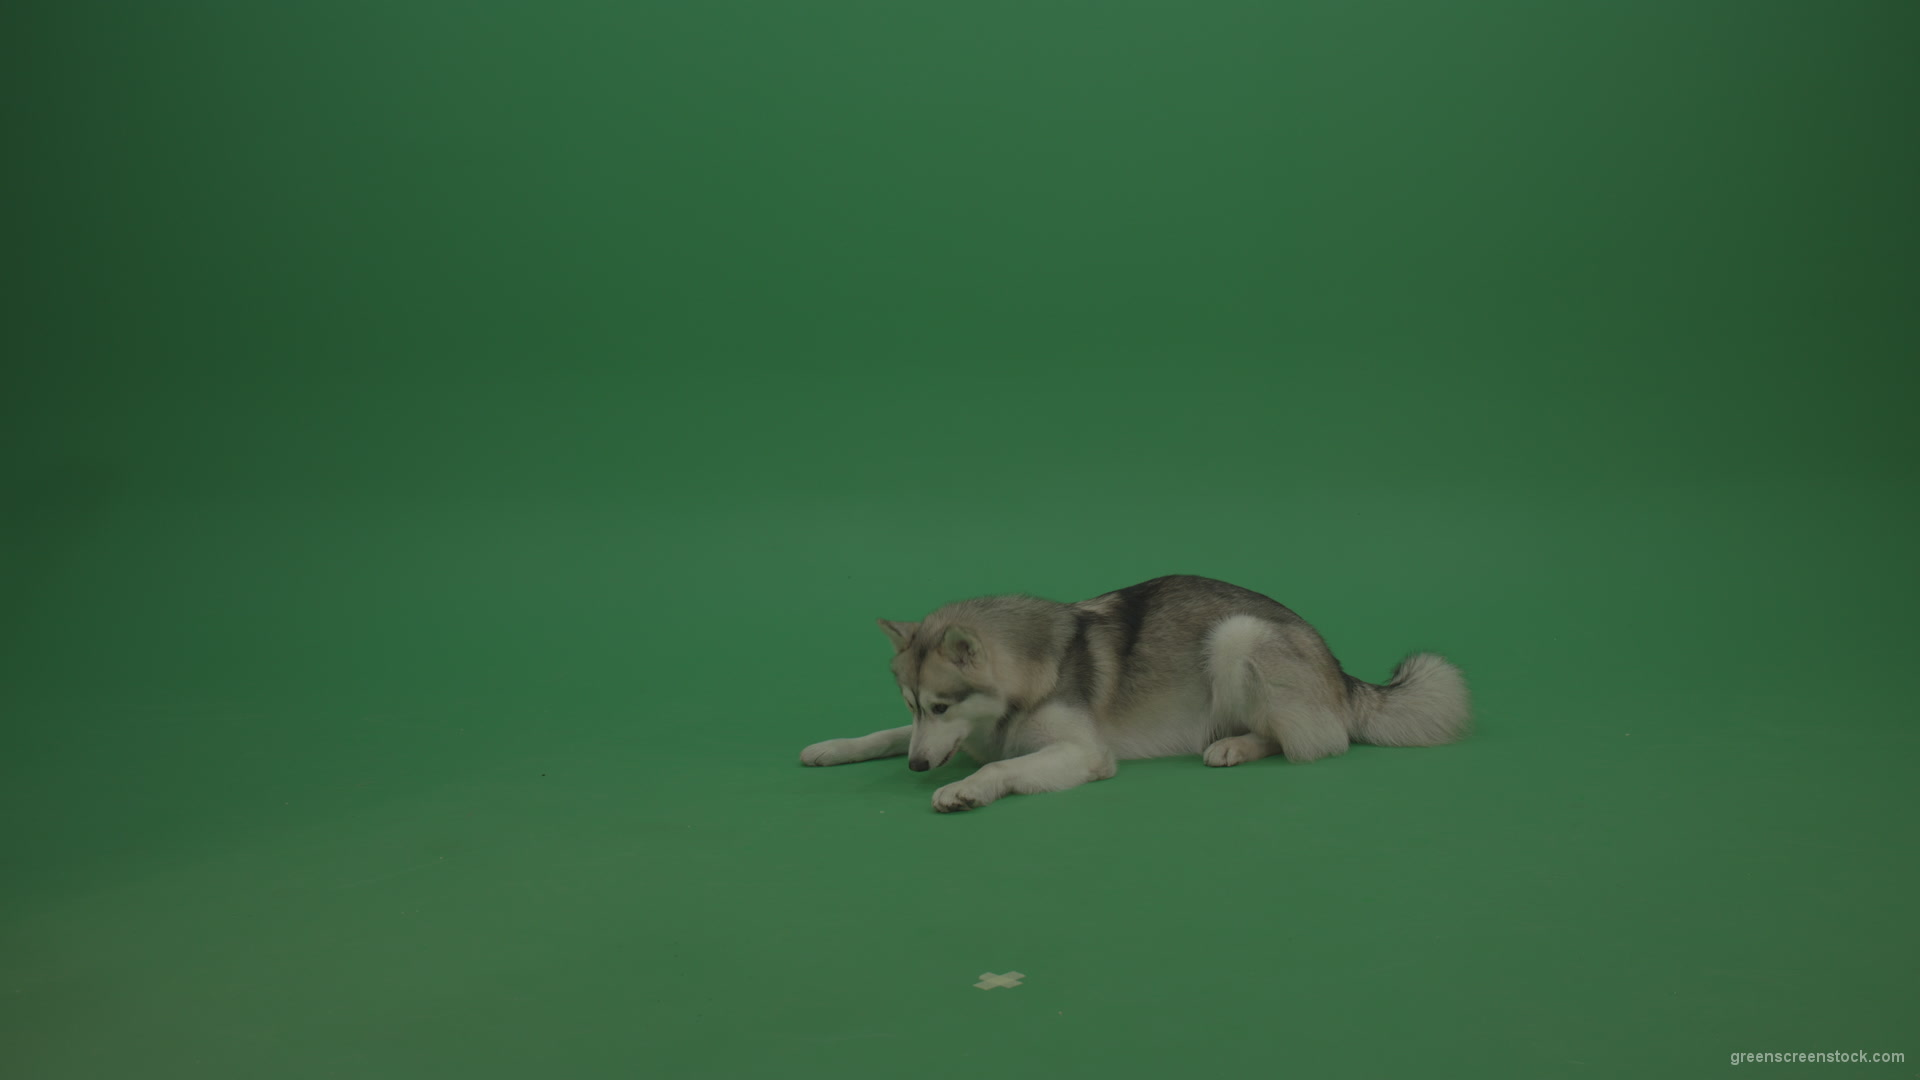 Grey_White_Huskie_Dog_Lying_On_The_Ground_Chewing_Coockie_Stands_Up_And_Walks_Away_Green_Screen_Wall_Background_006 Green Screen Stock